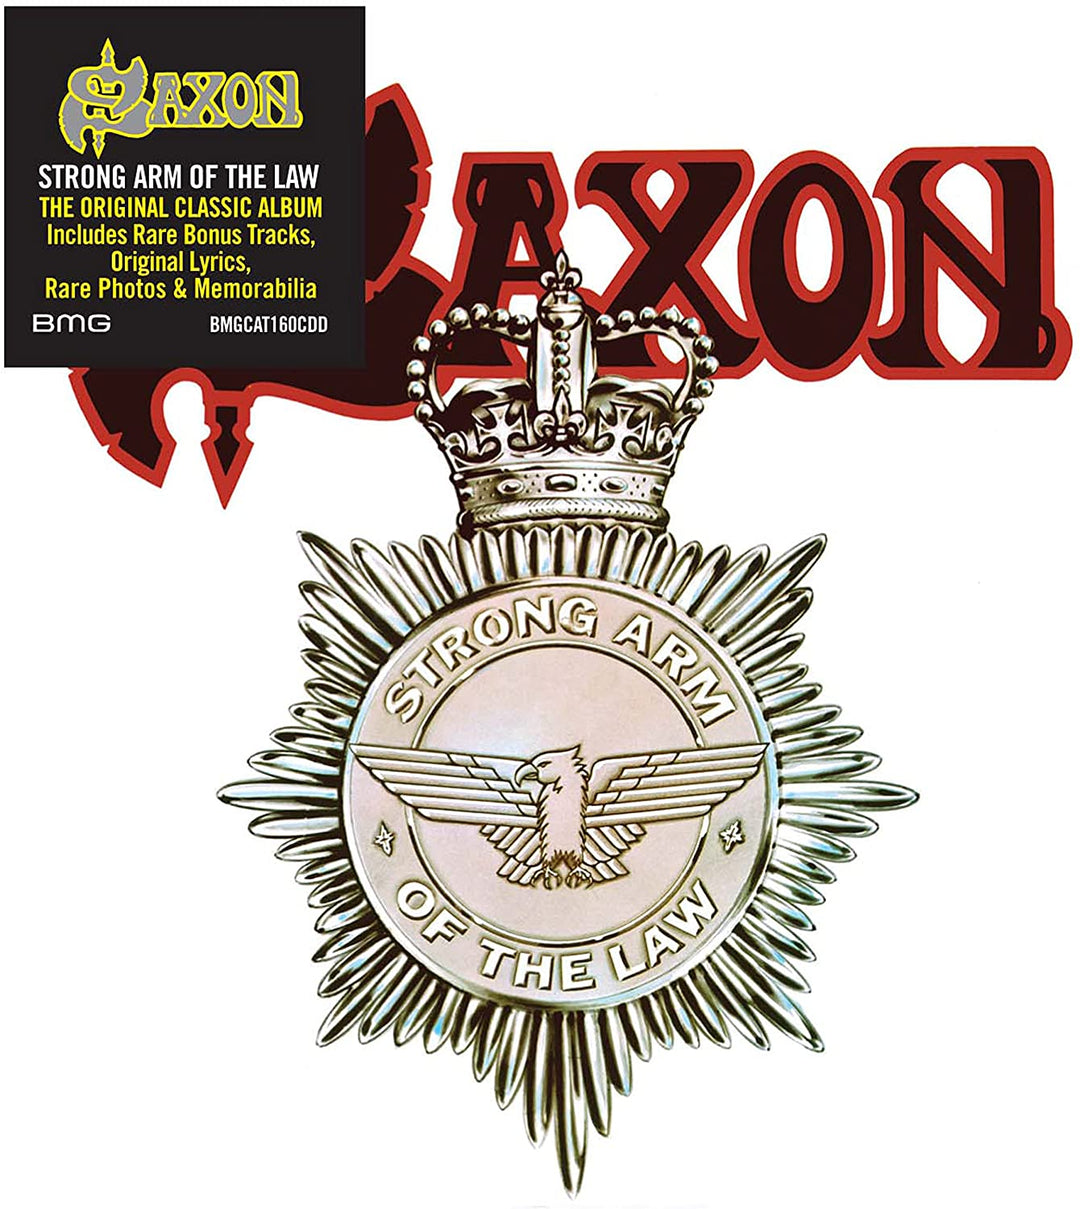 Strong Arm of the Law [Audio CD]